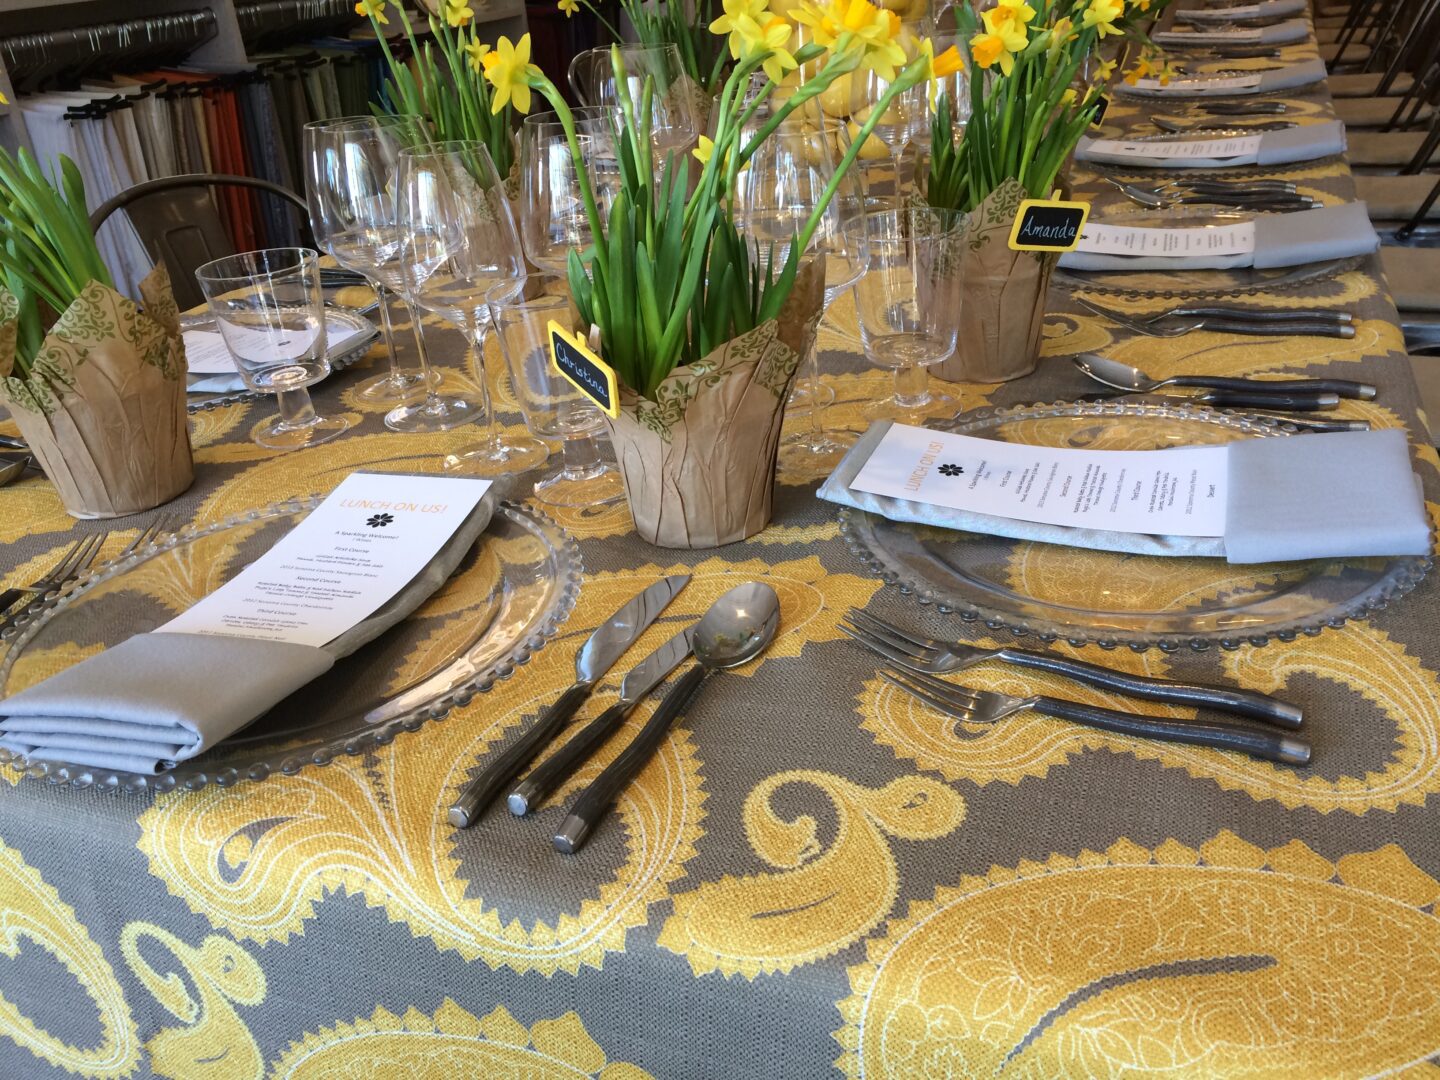 A yellow and gray tablecloth.